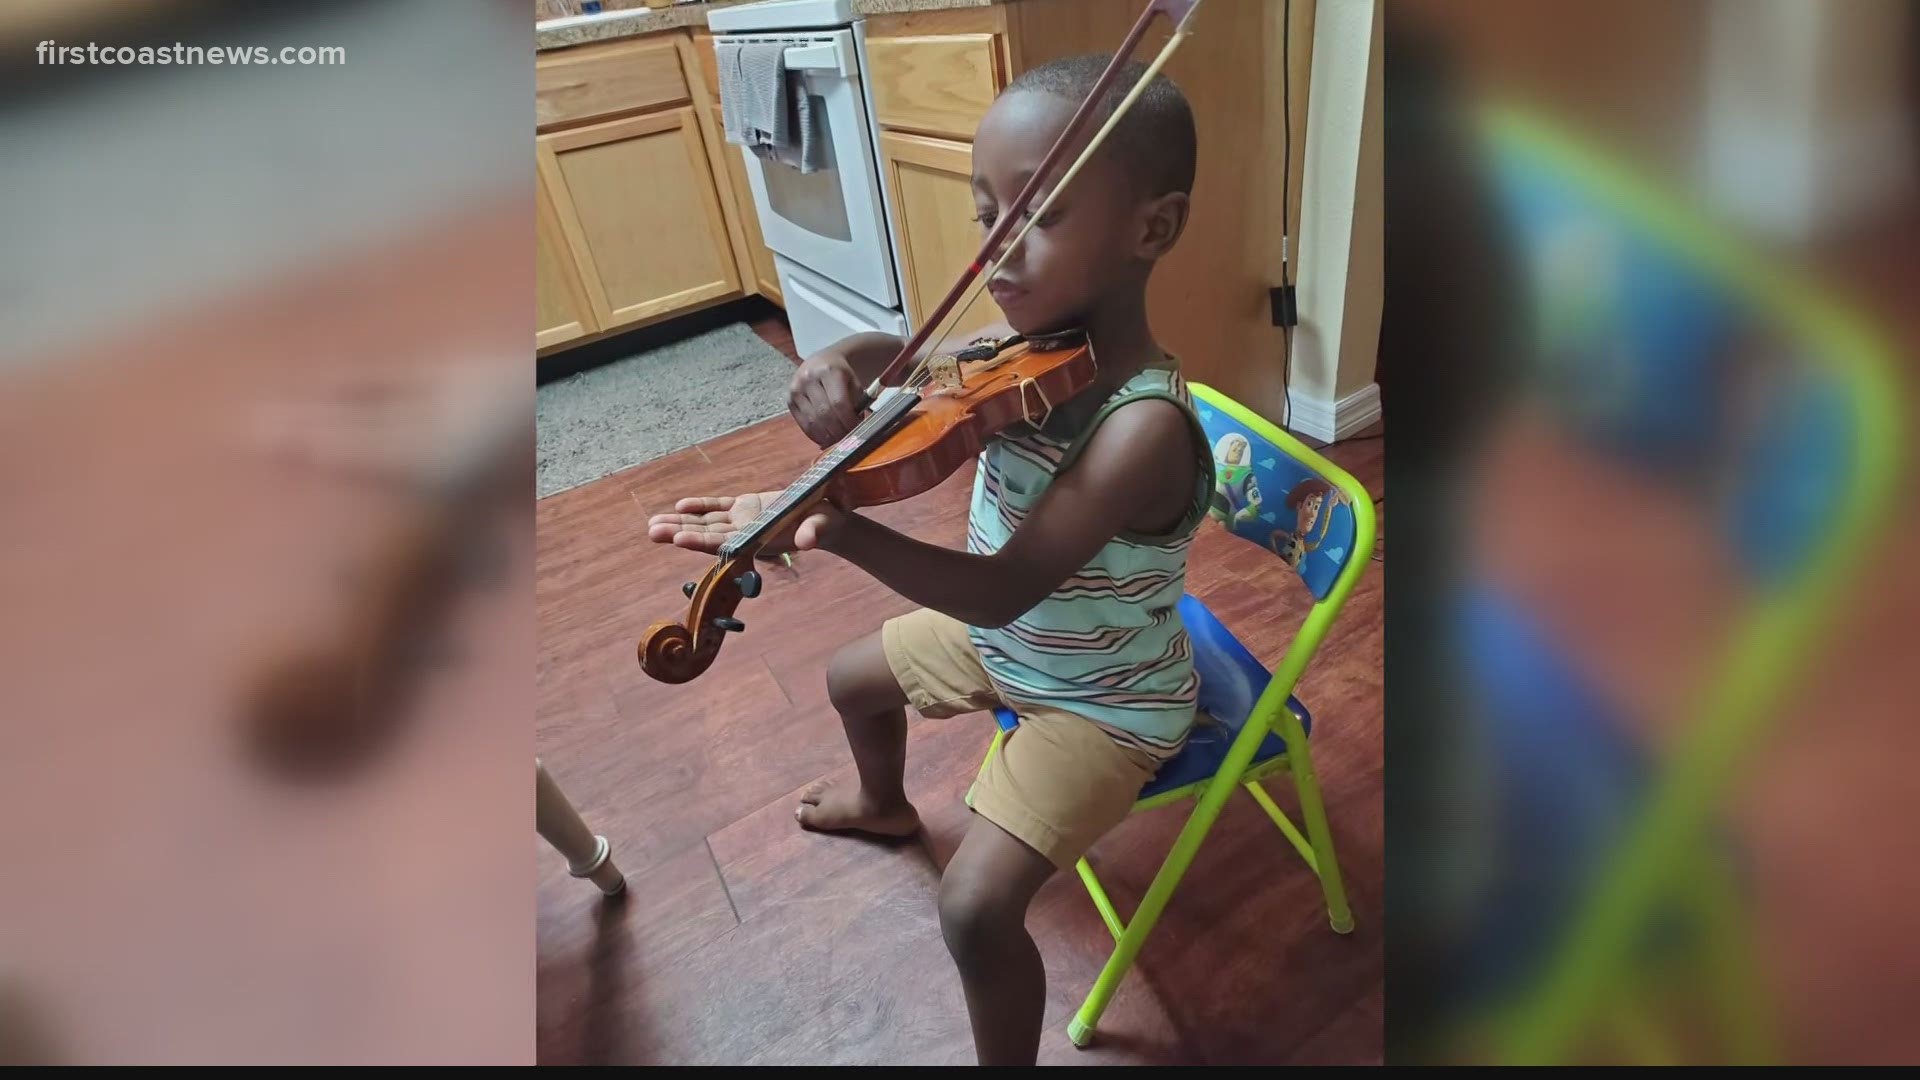 Childhood music program aims to start kids on the right note, keep them away from violence